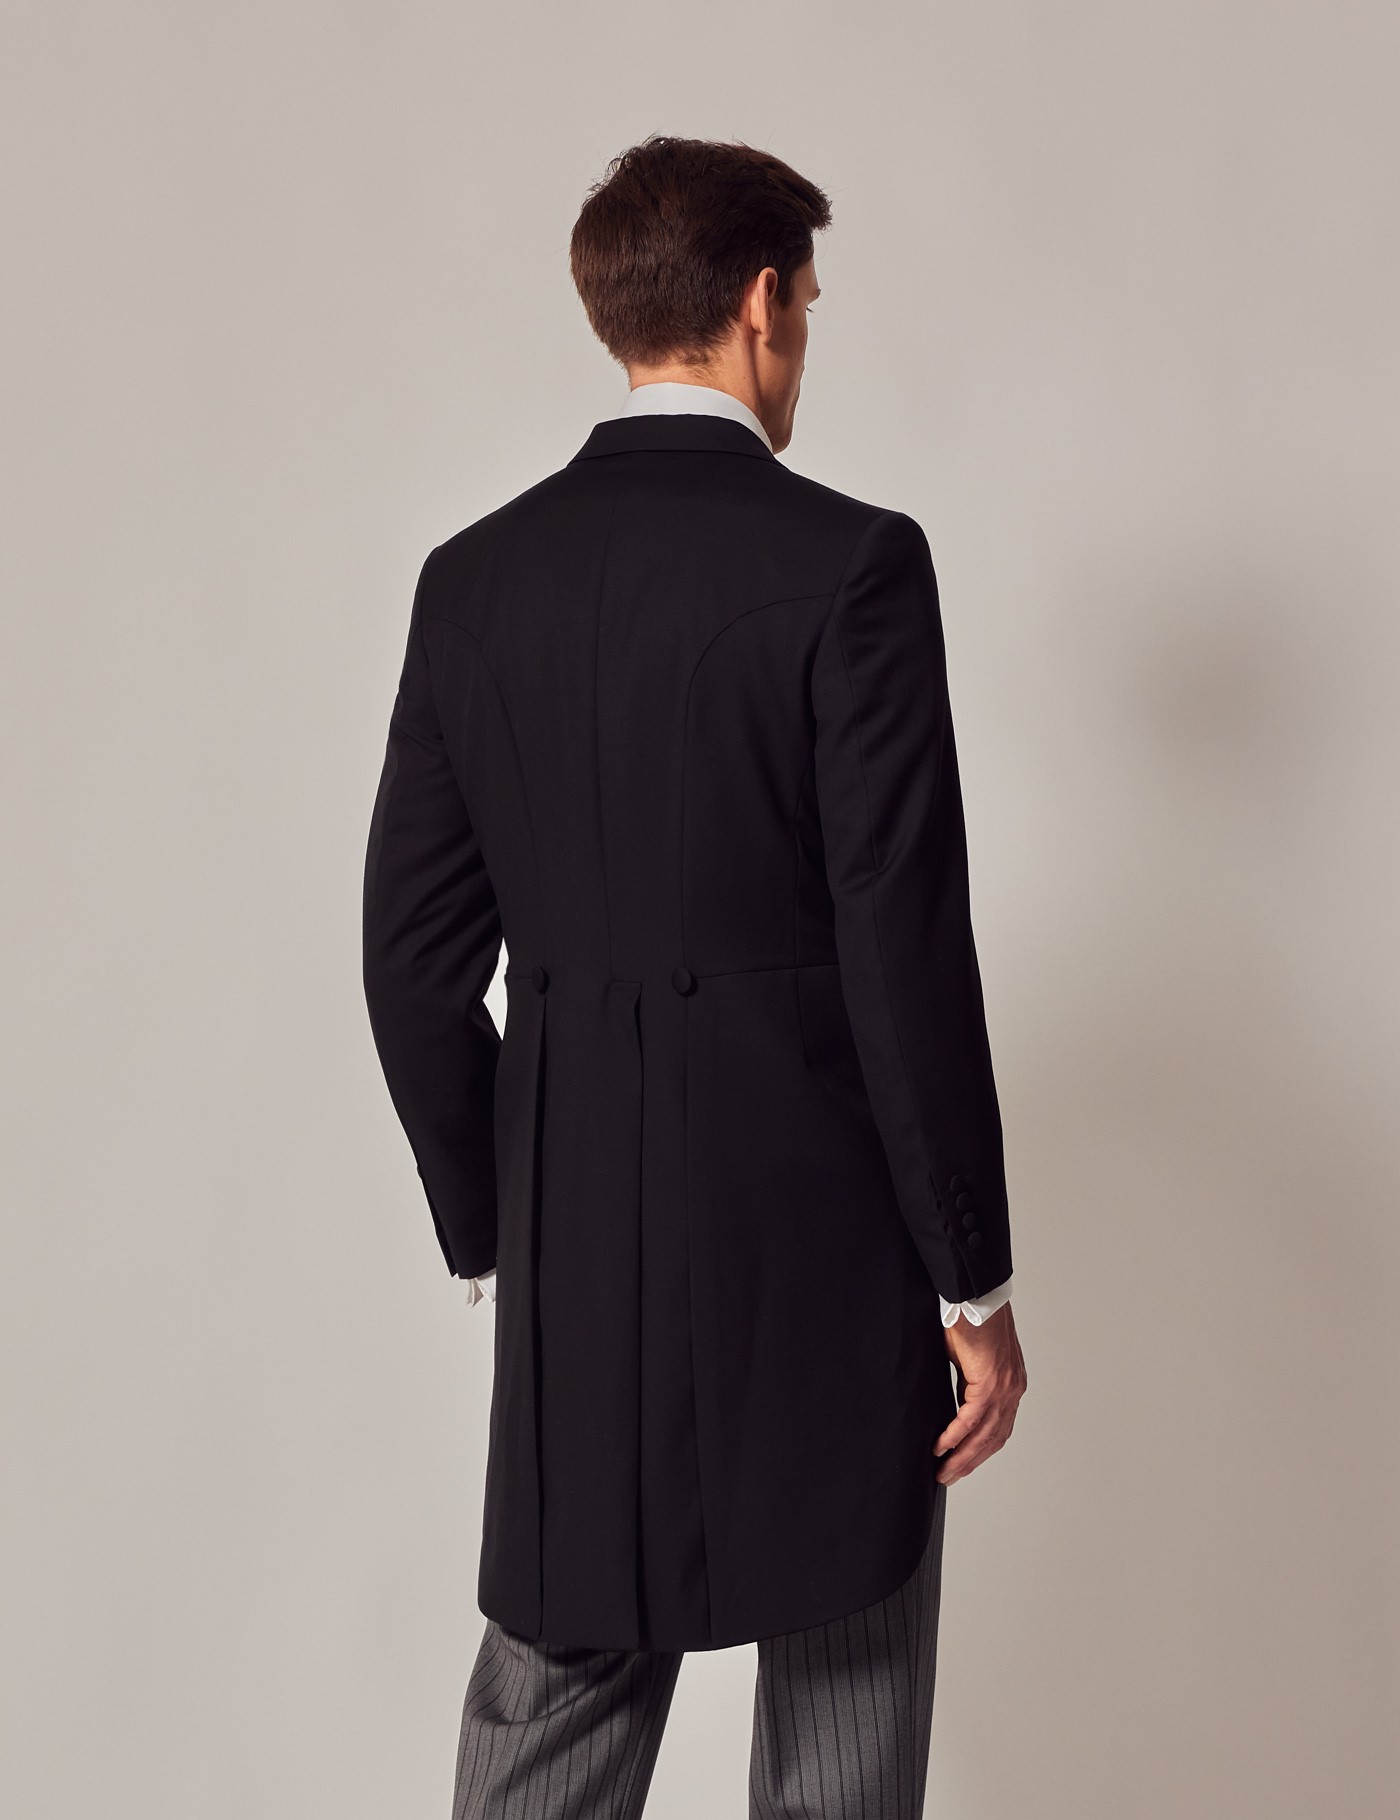 Men's Black Italian Wool Morning Coat – 1913 Collection | Hawes & Curtis